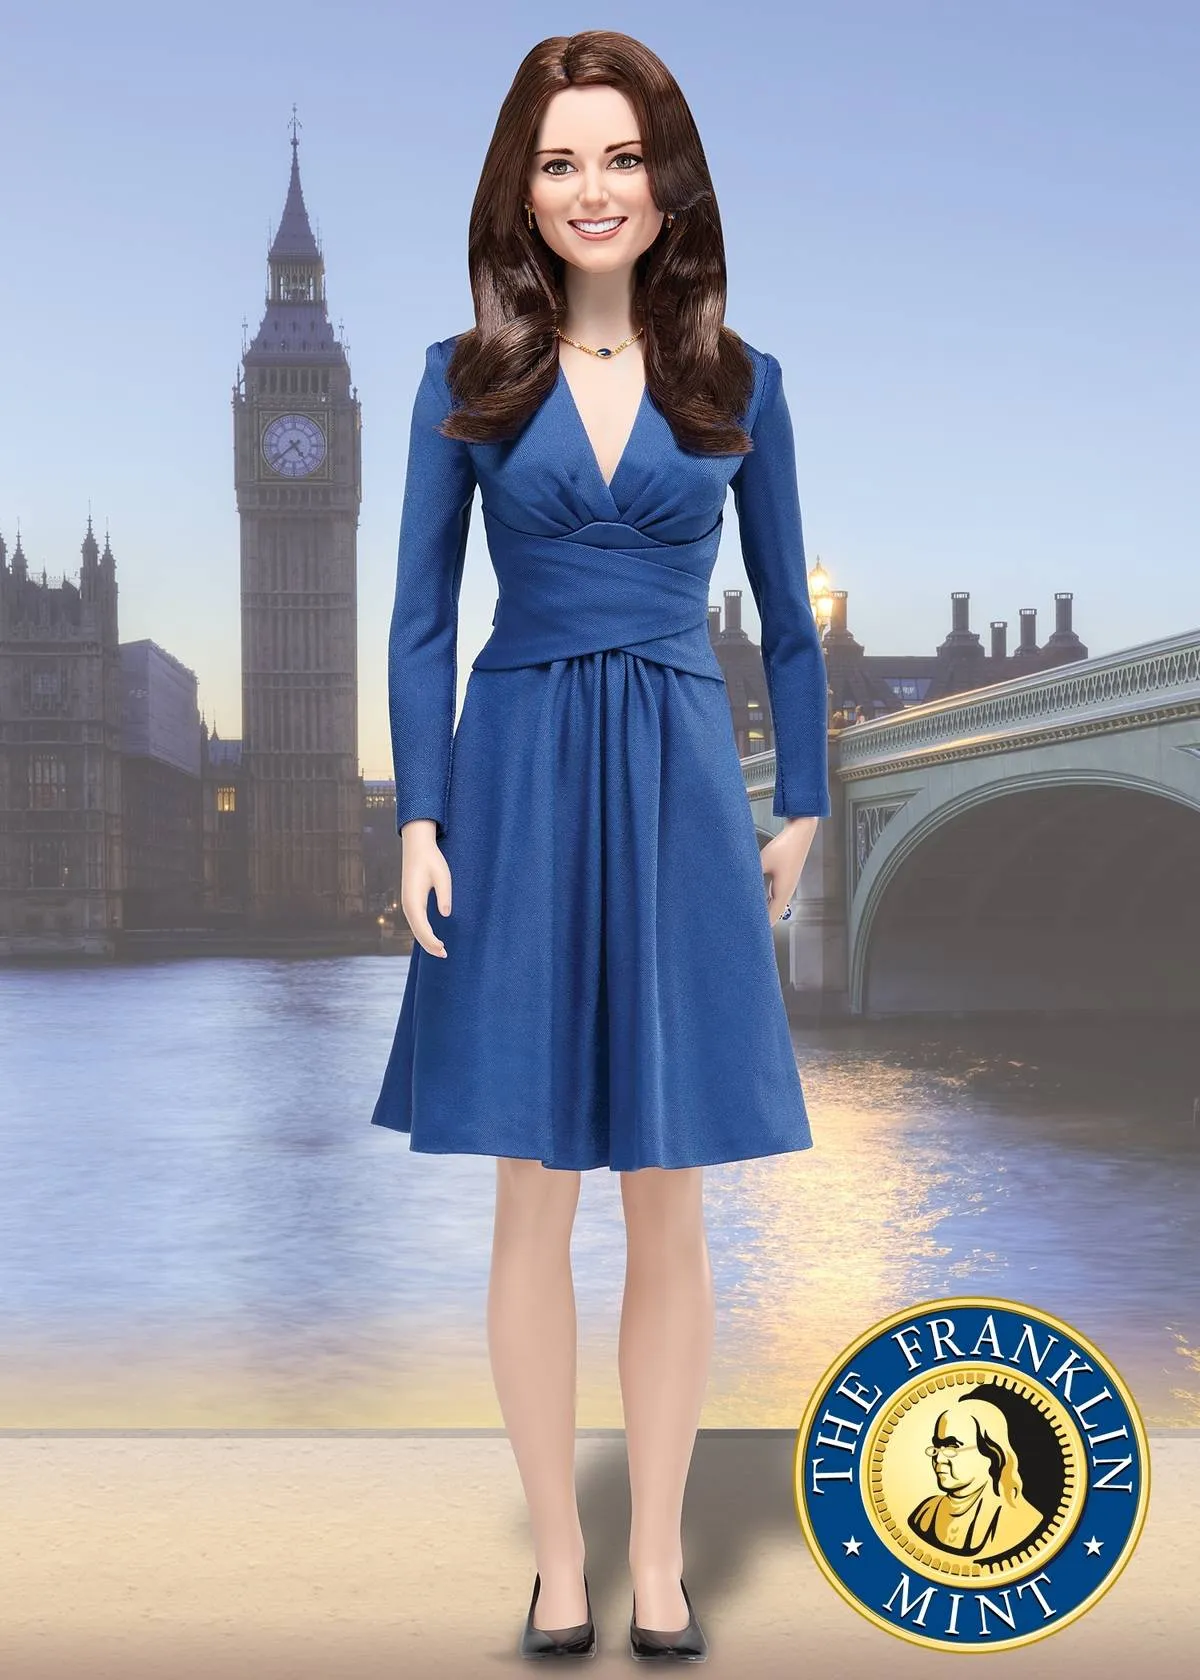 The Franklin Mint's Limited Edition Commemorative Kate Middleton 